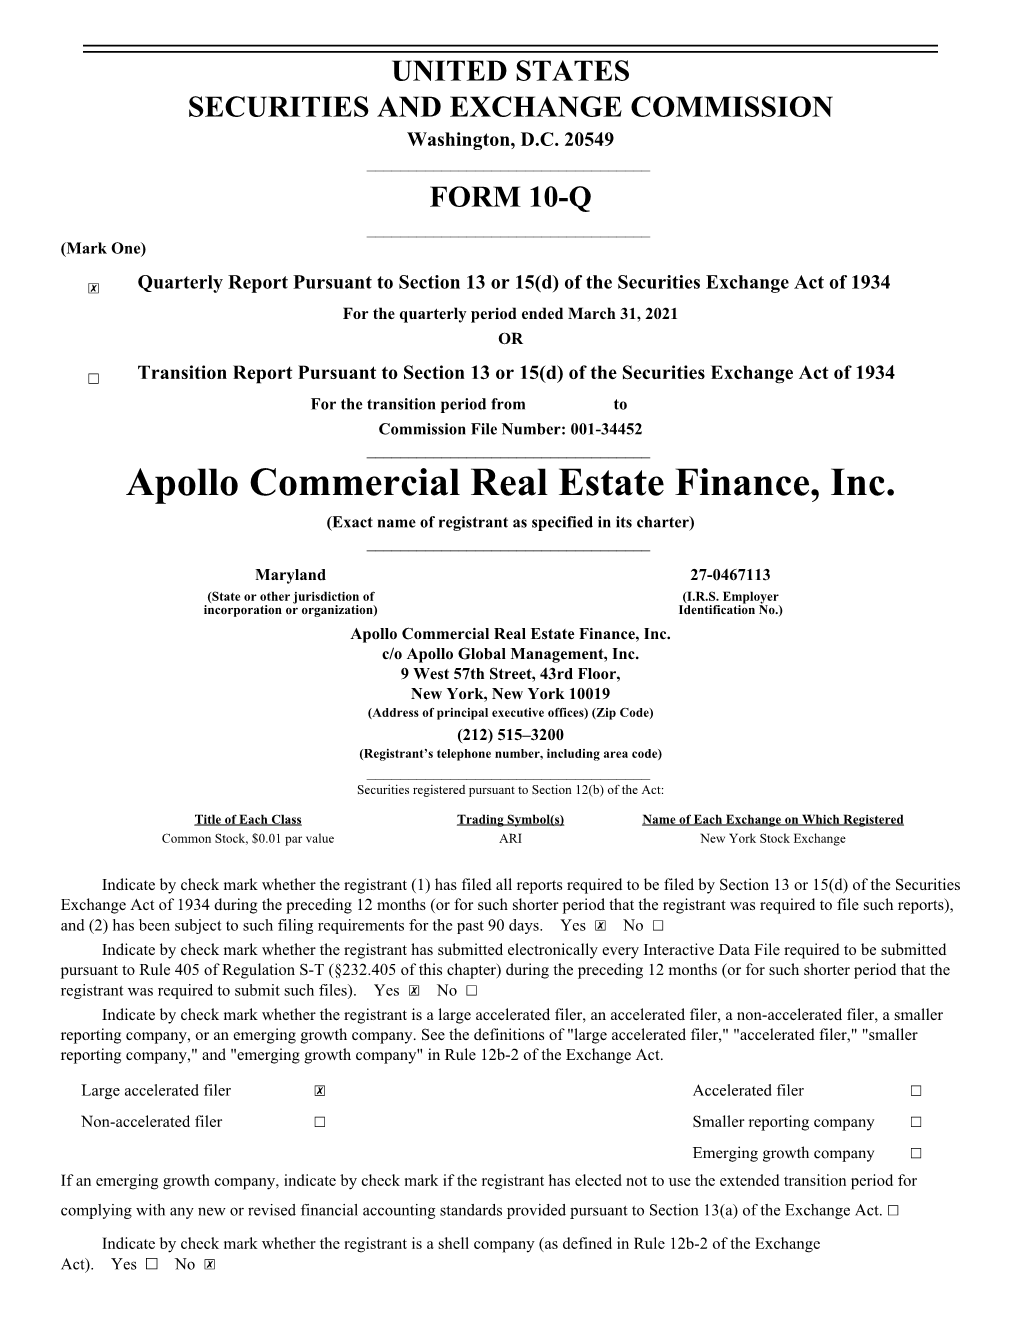 Apollo Commercial Real Estate Finance, Inc. (Exact Name of Registrant As Specified in Its Charter) ______